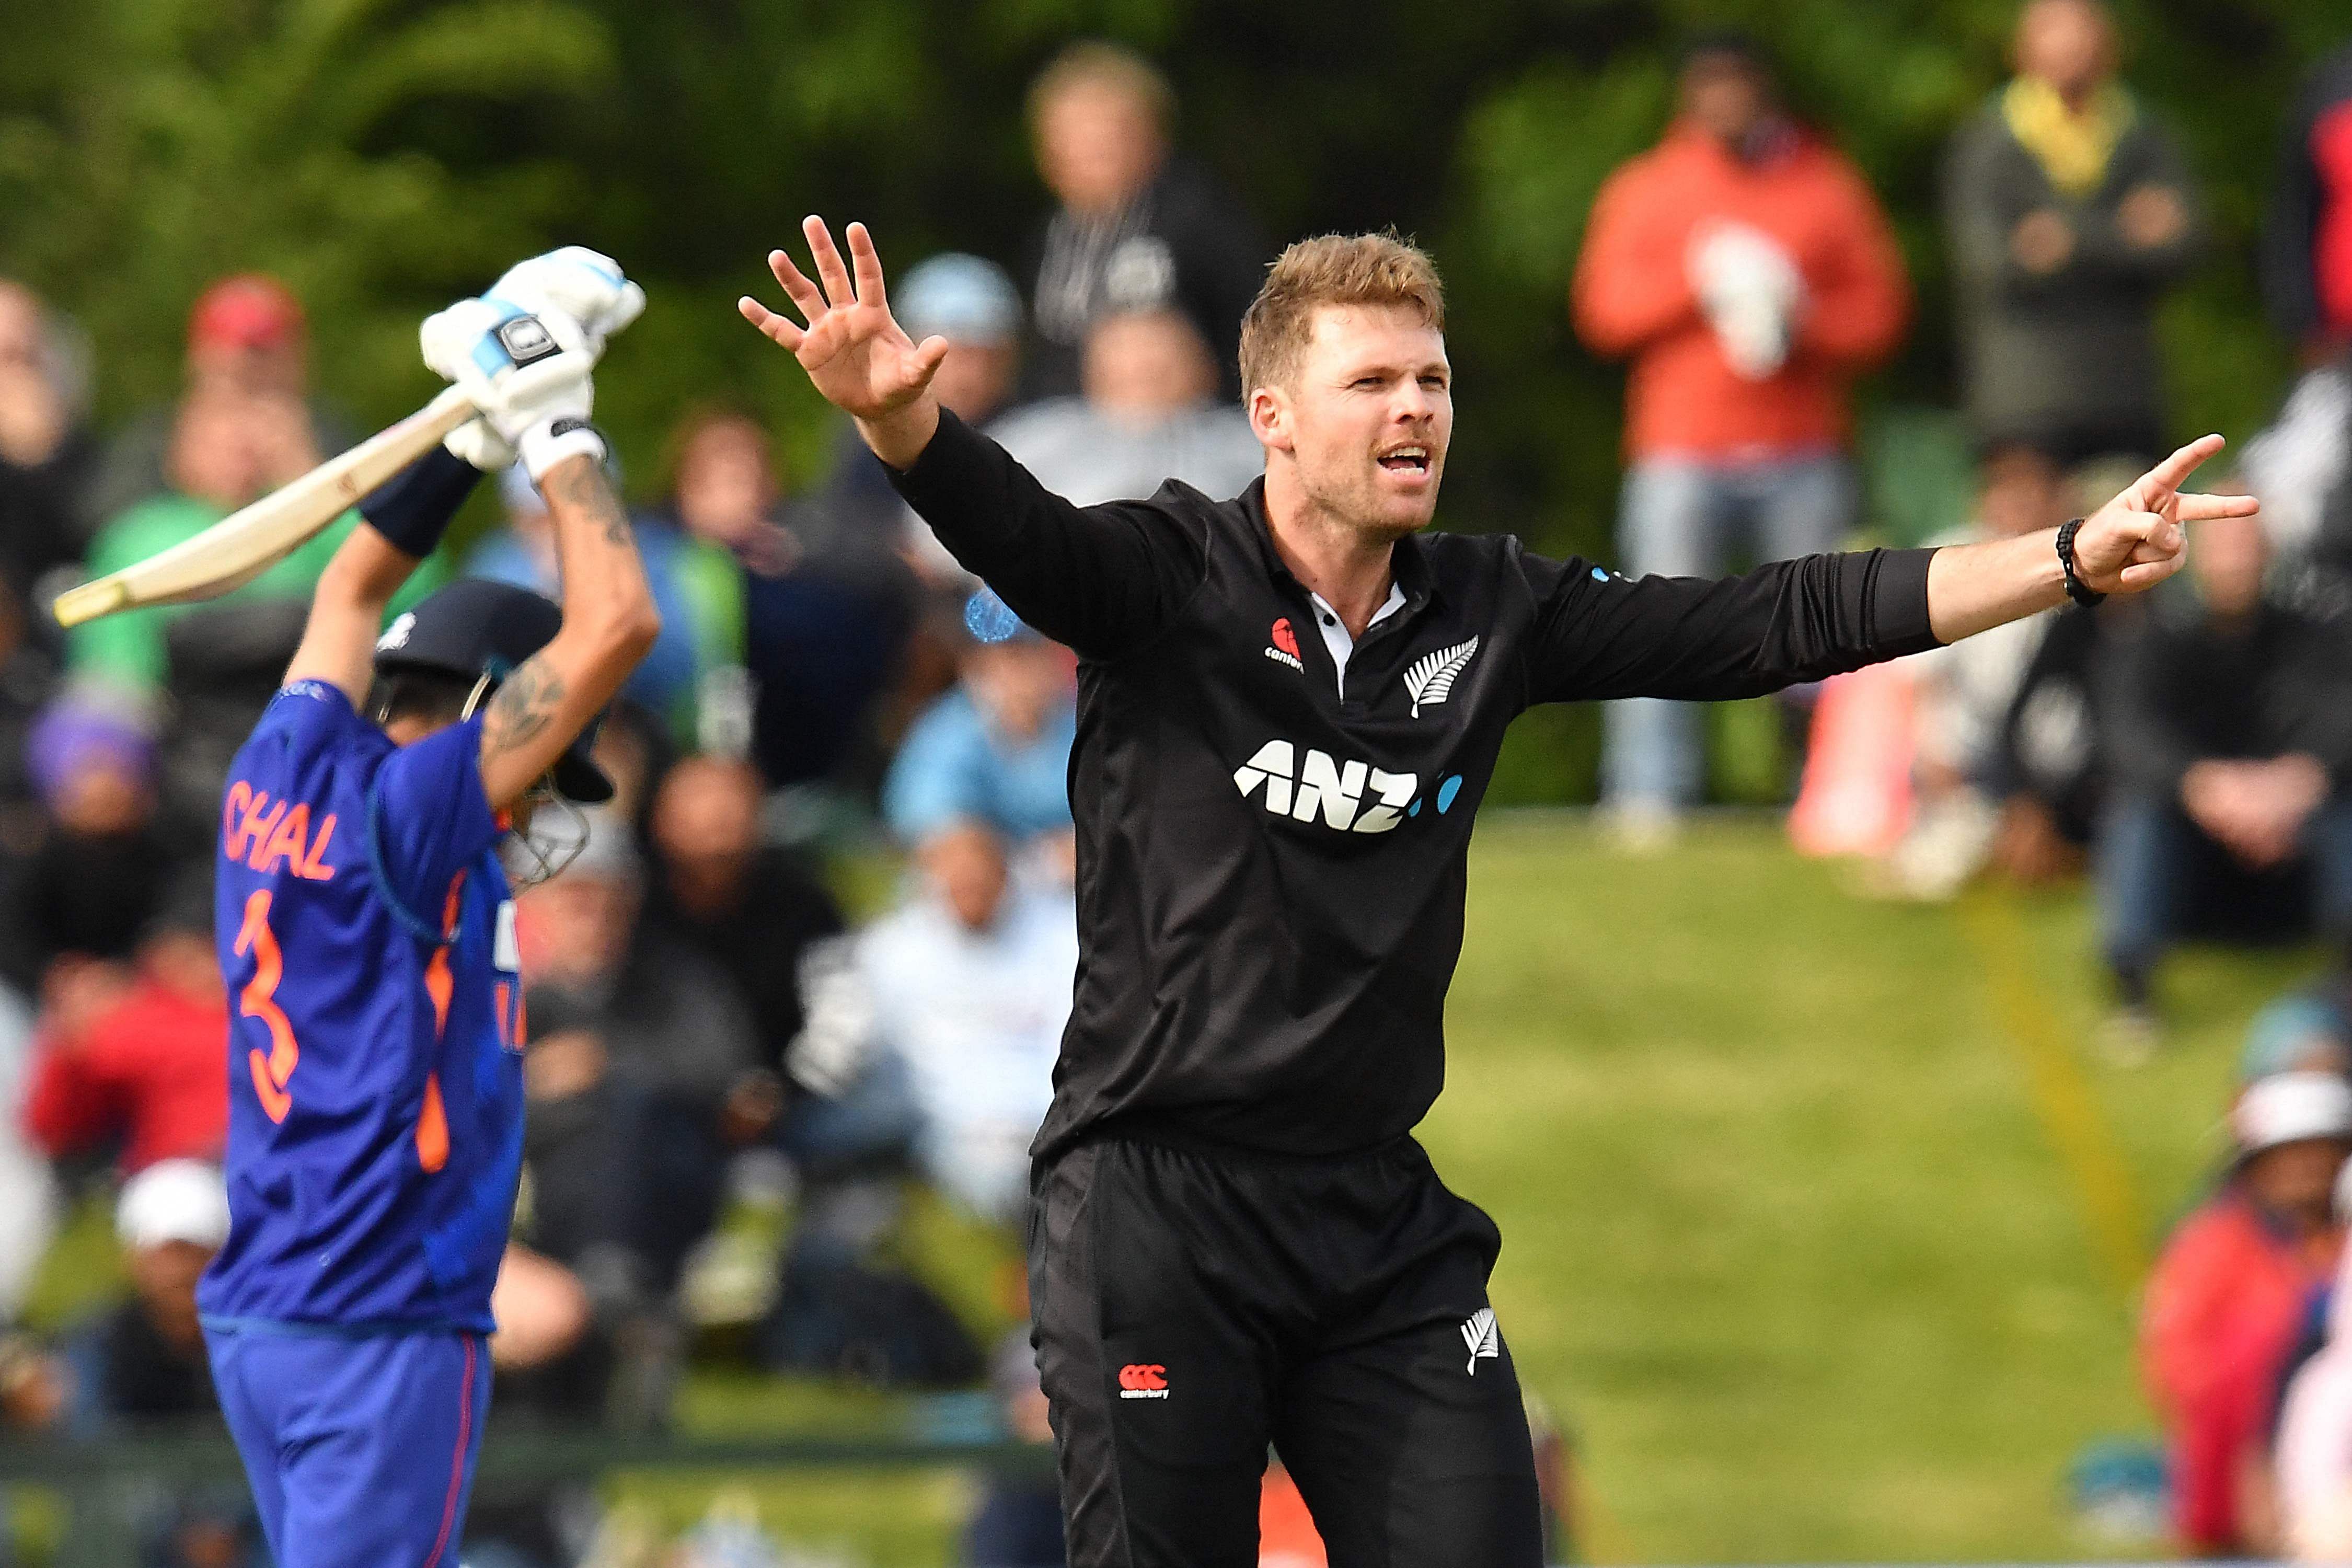 New Zealand's Lockie Ferguson (R) appeals unsuccessfully against India's Yuzvendra Chahal during the third and final one-day international cricket match between New Zealand and India. Credit: AFP Photo